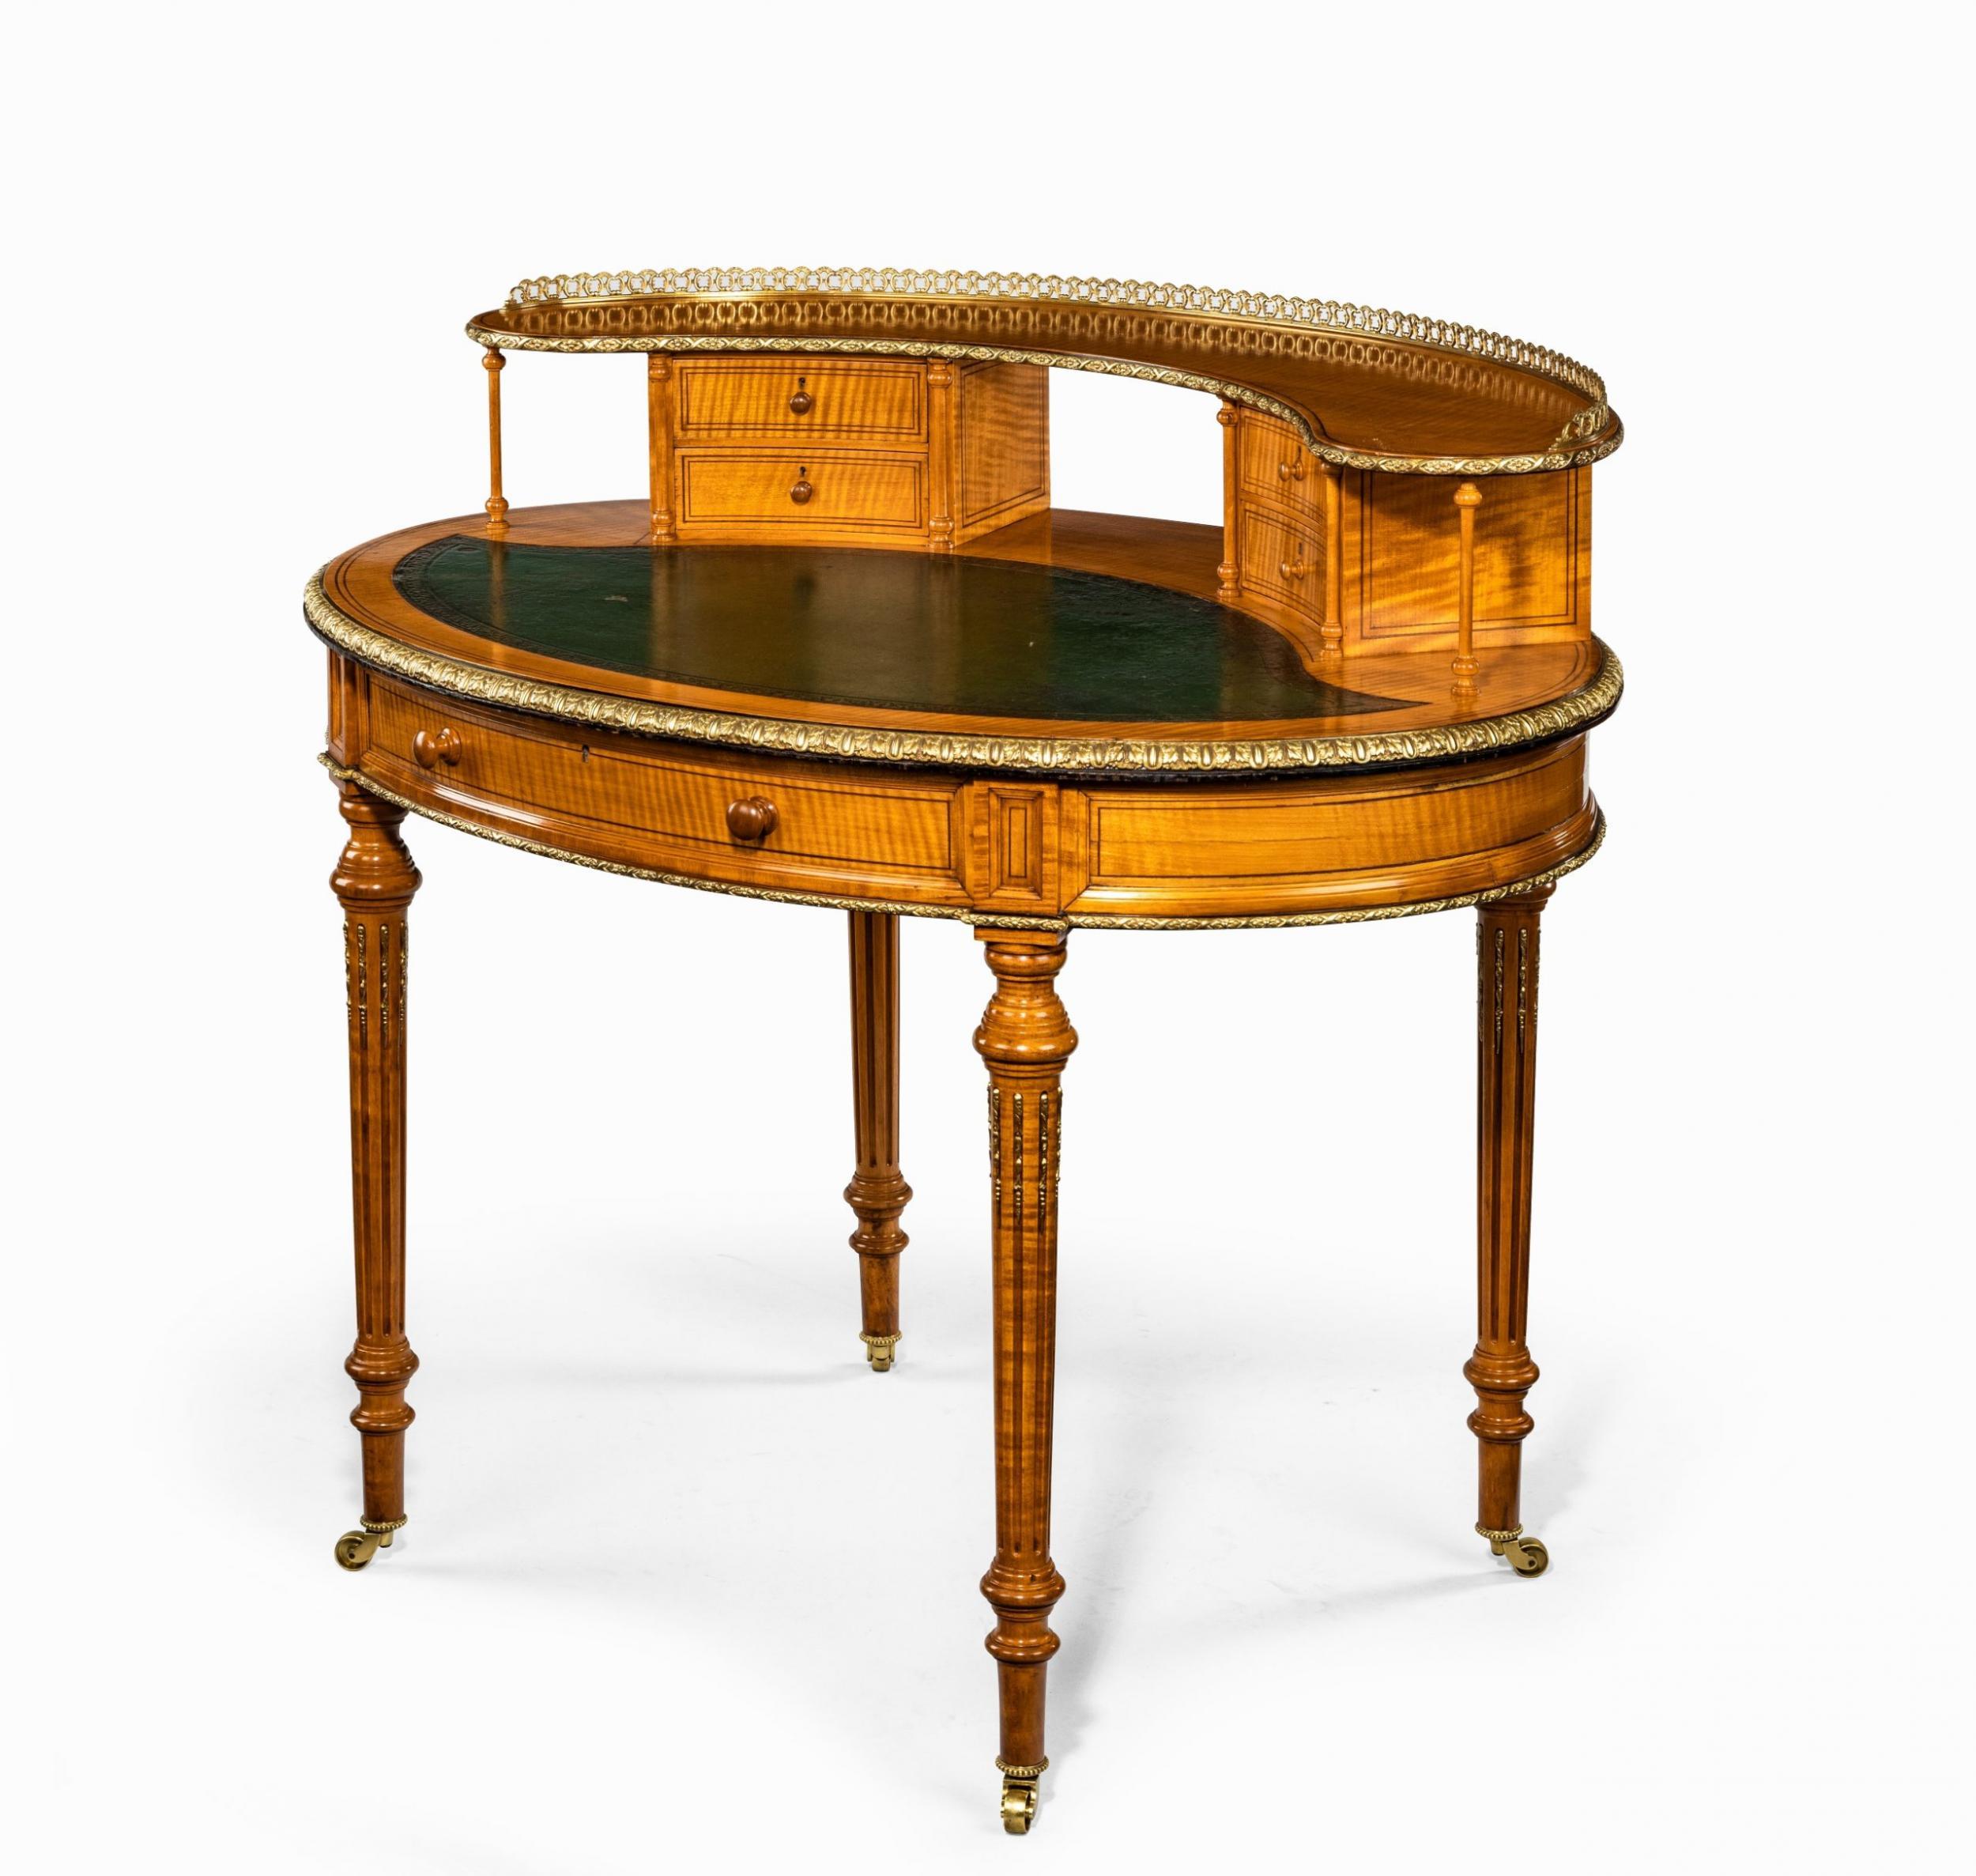 An unusual Victorian freestanding oval satinwood desk, the leather-inset top supporting a shaped open shelf with an ormolu gallery above two pairs of small drawers with a bookshelf between, flanked by slender turned columns, the frieze with a